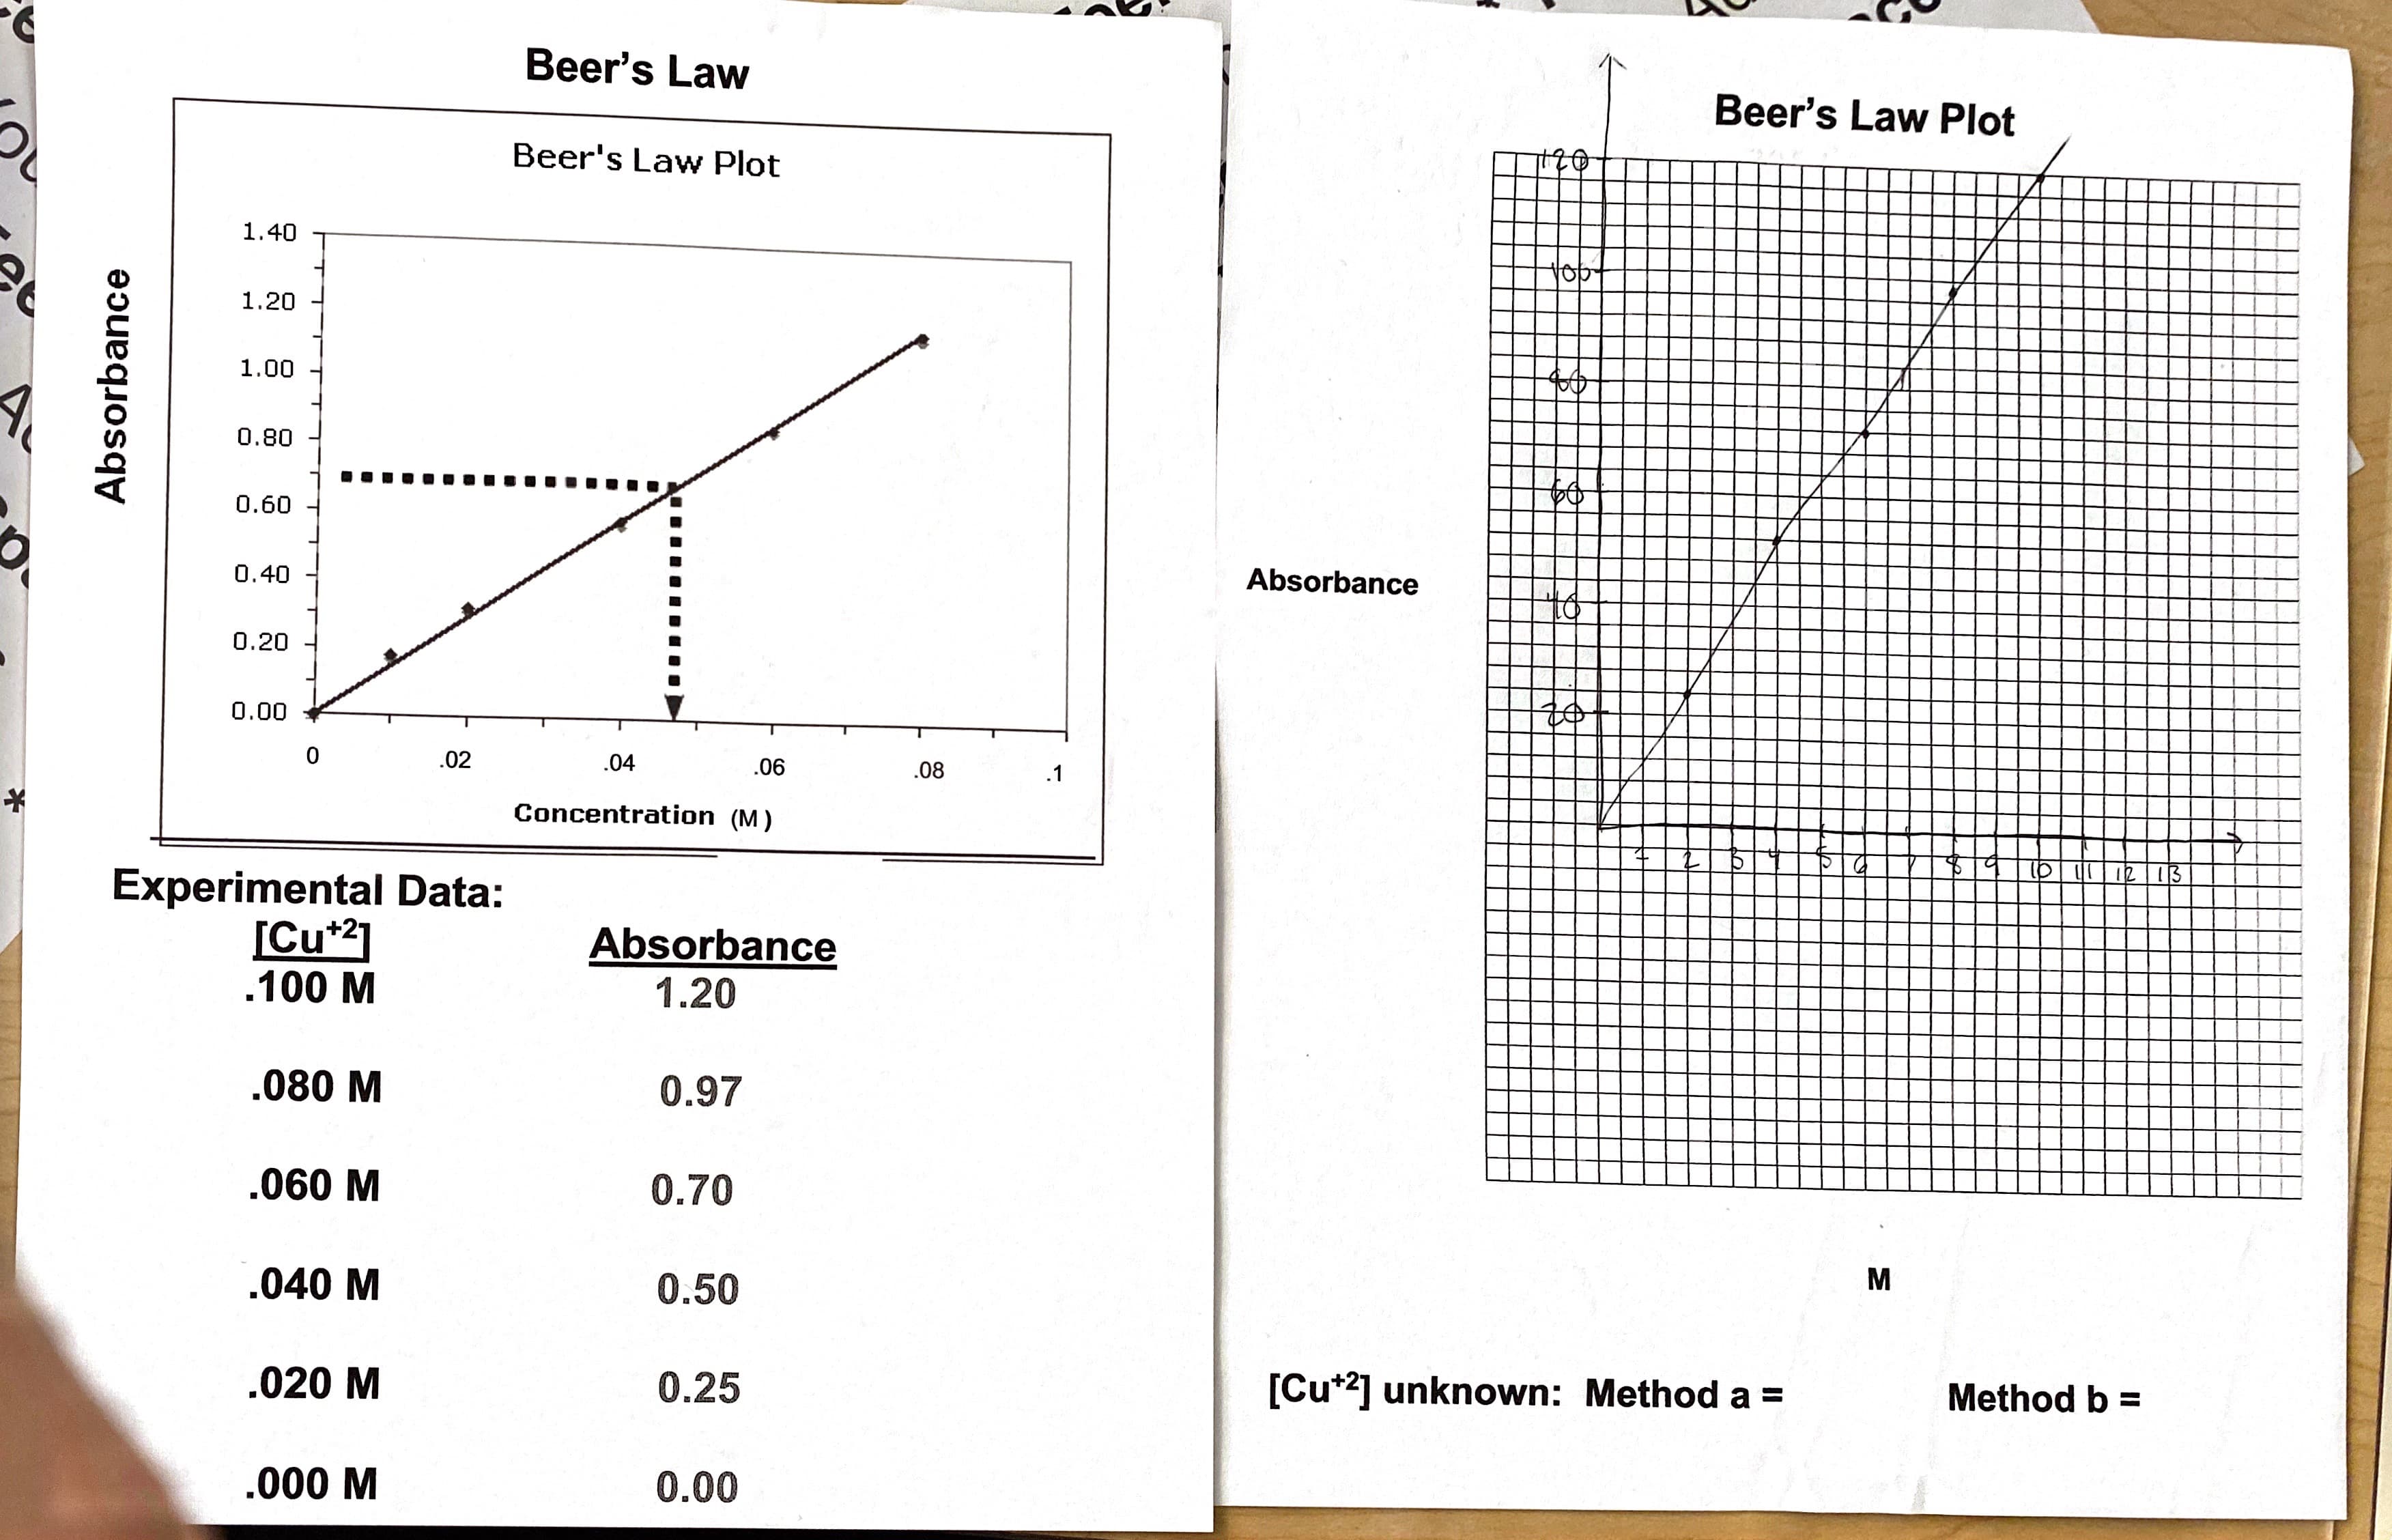 Absorbance
:-
Beer's Law
Beer's Law Plot
Beer's Law Plot
1.40
yob
1.20
1.00
0.80
0.60
0.40
Absorbance
0.20
0.00
.02
.04
.06
.08
.1
Concentration (M)
Experimental Data:
[Cu*2]
.100 M
Absorbance
1.20
.080 M
0.97
.060 M
0.70
M
.040 M
0.50
.020 M
0.25
[Cu*2] unknown: Method a =
Method b =
.000 M
0.00
